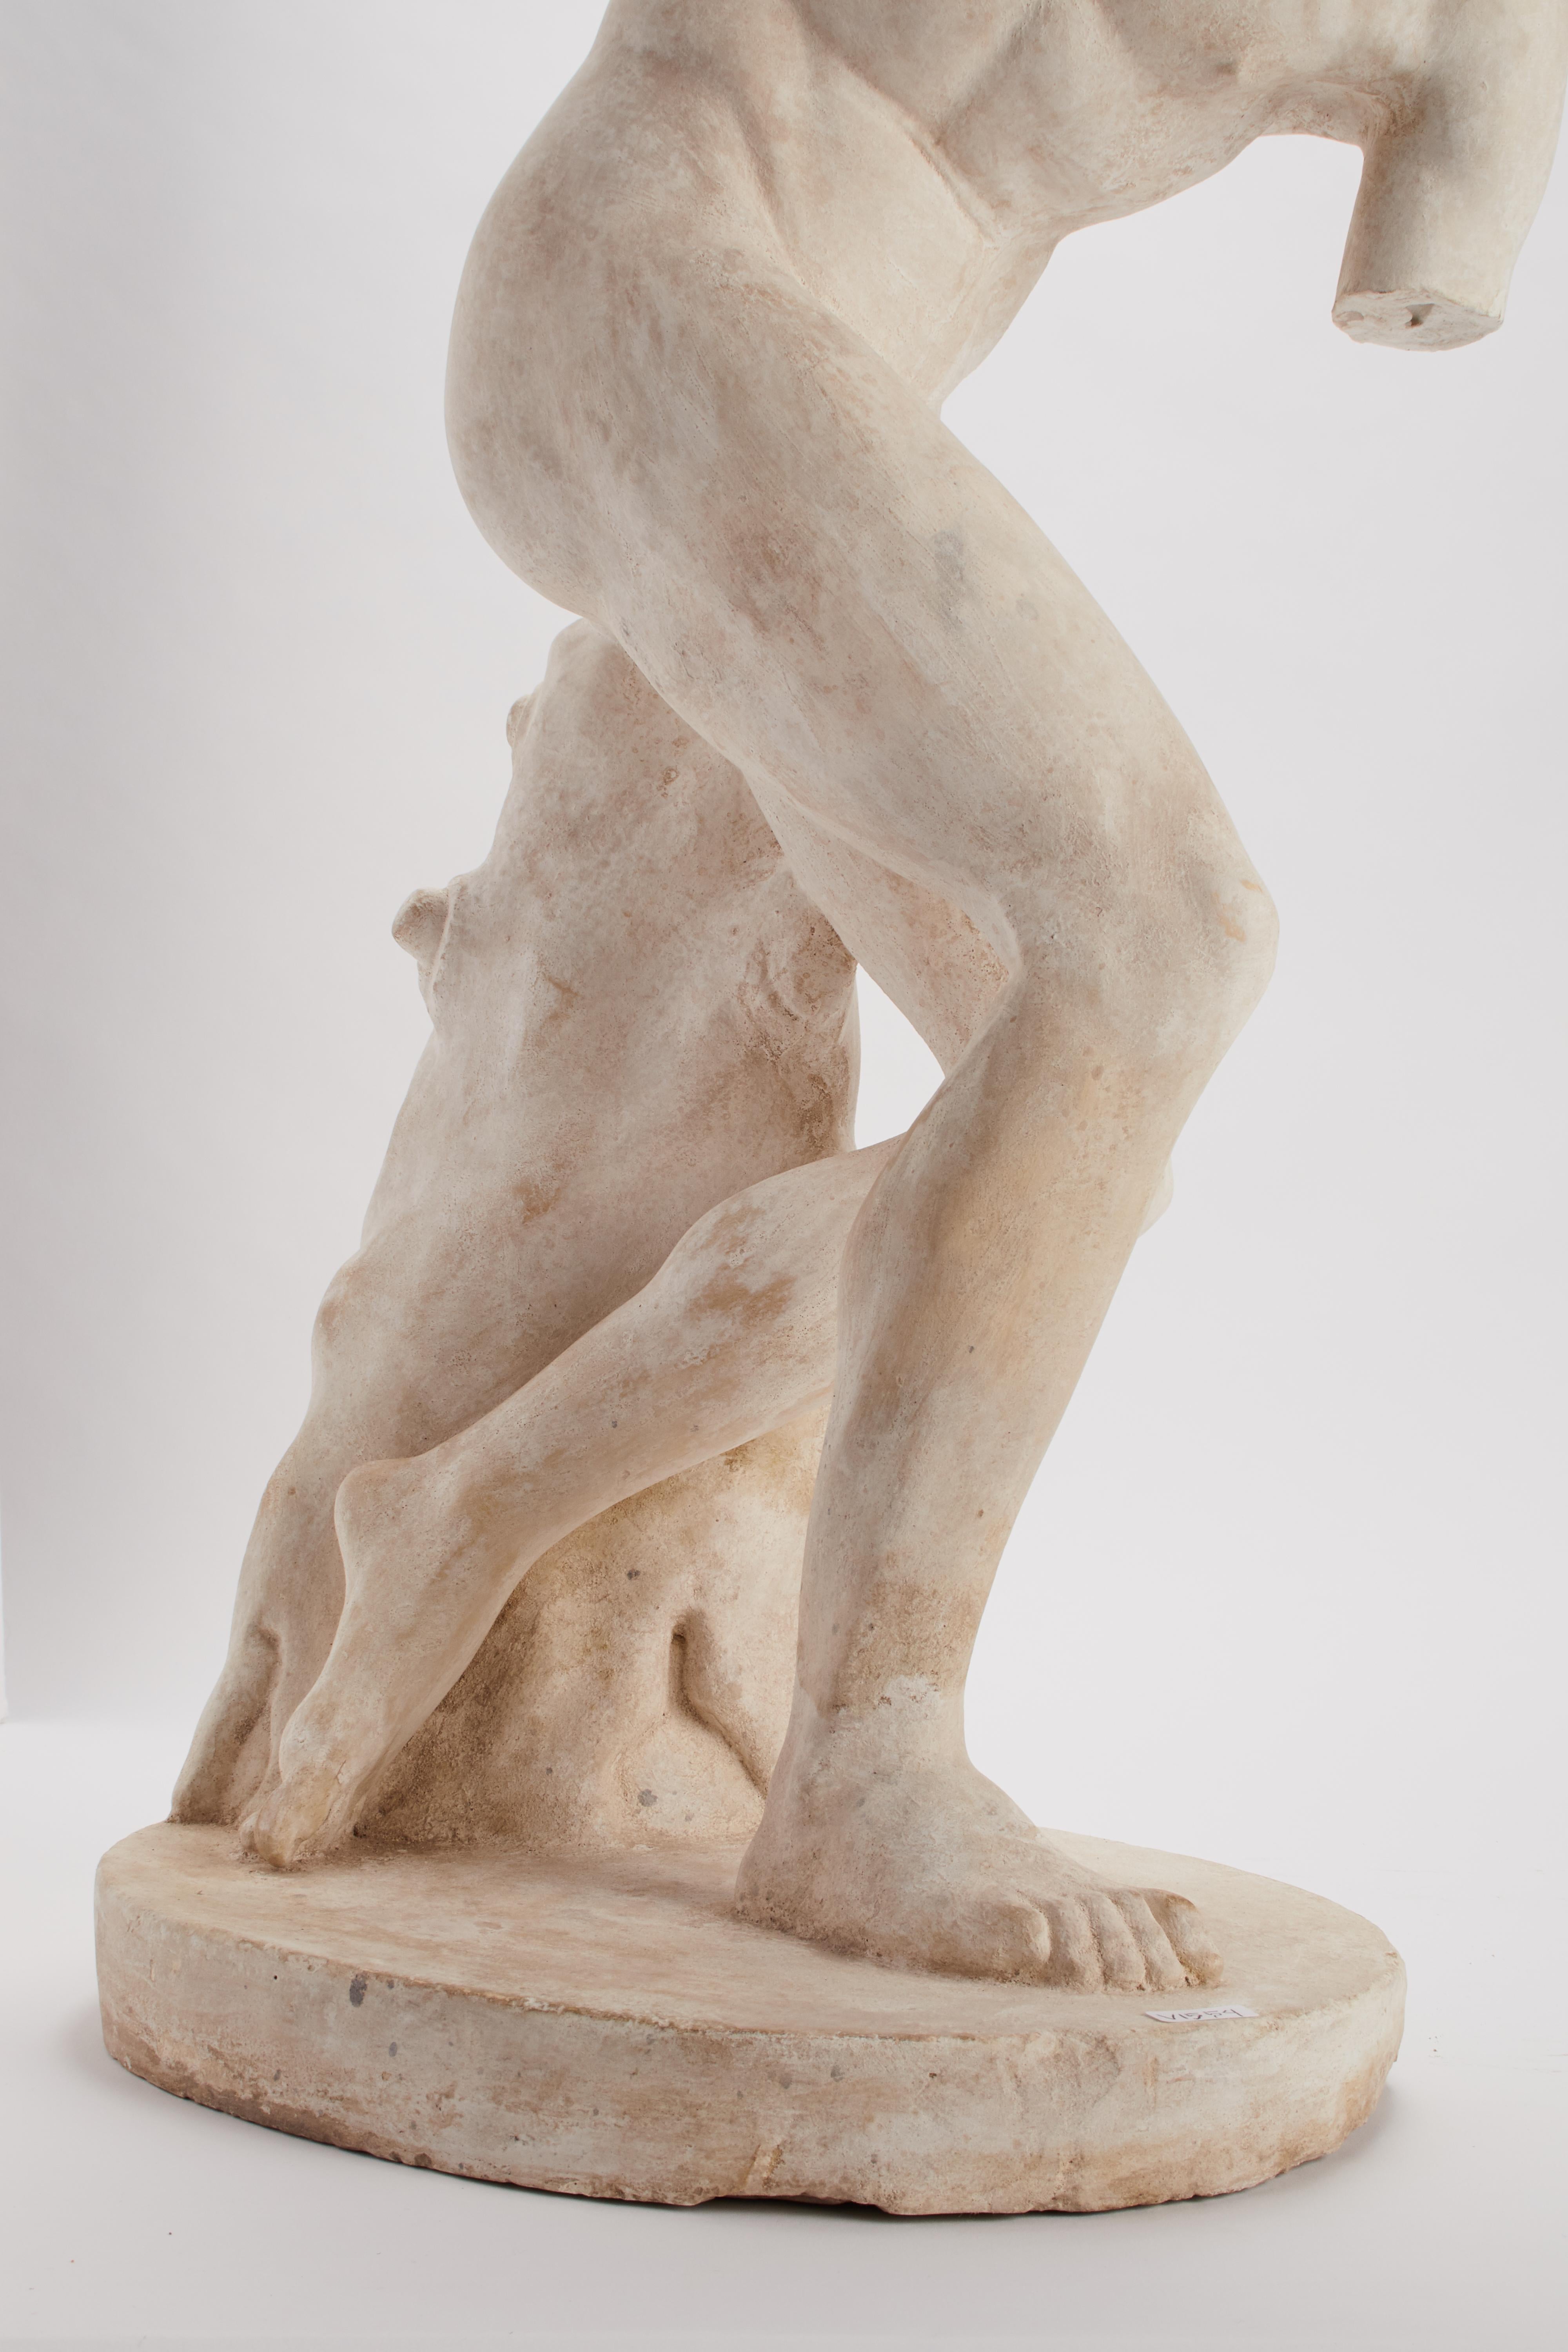 Plaster Academic Cast Depicting a Discus Thrower, Italy, 1890